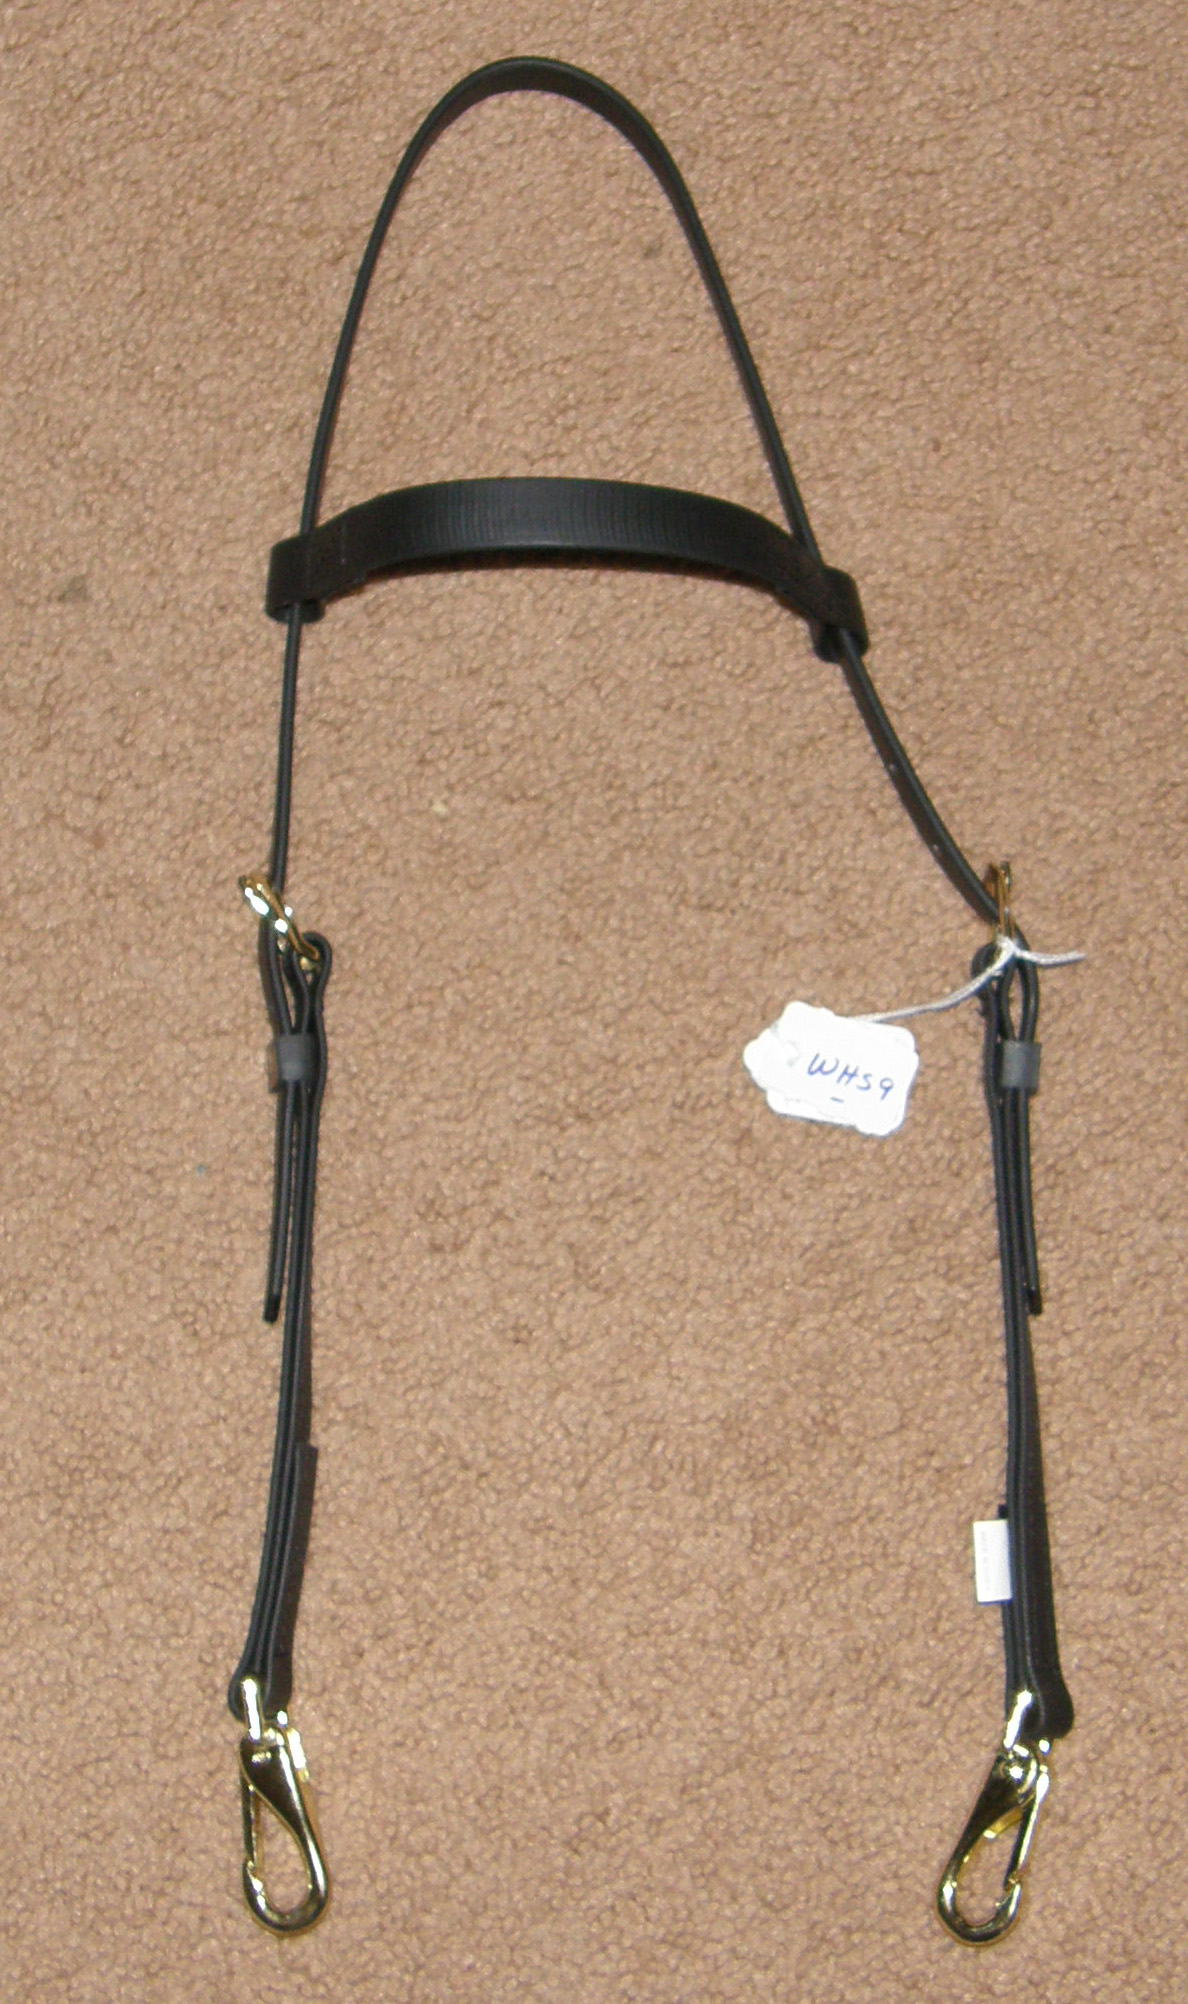 Synthetic Browband Western Headstall with Snaps Biothane Training Headstall Western Trail Bridle Black Horse